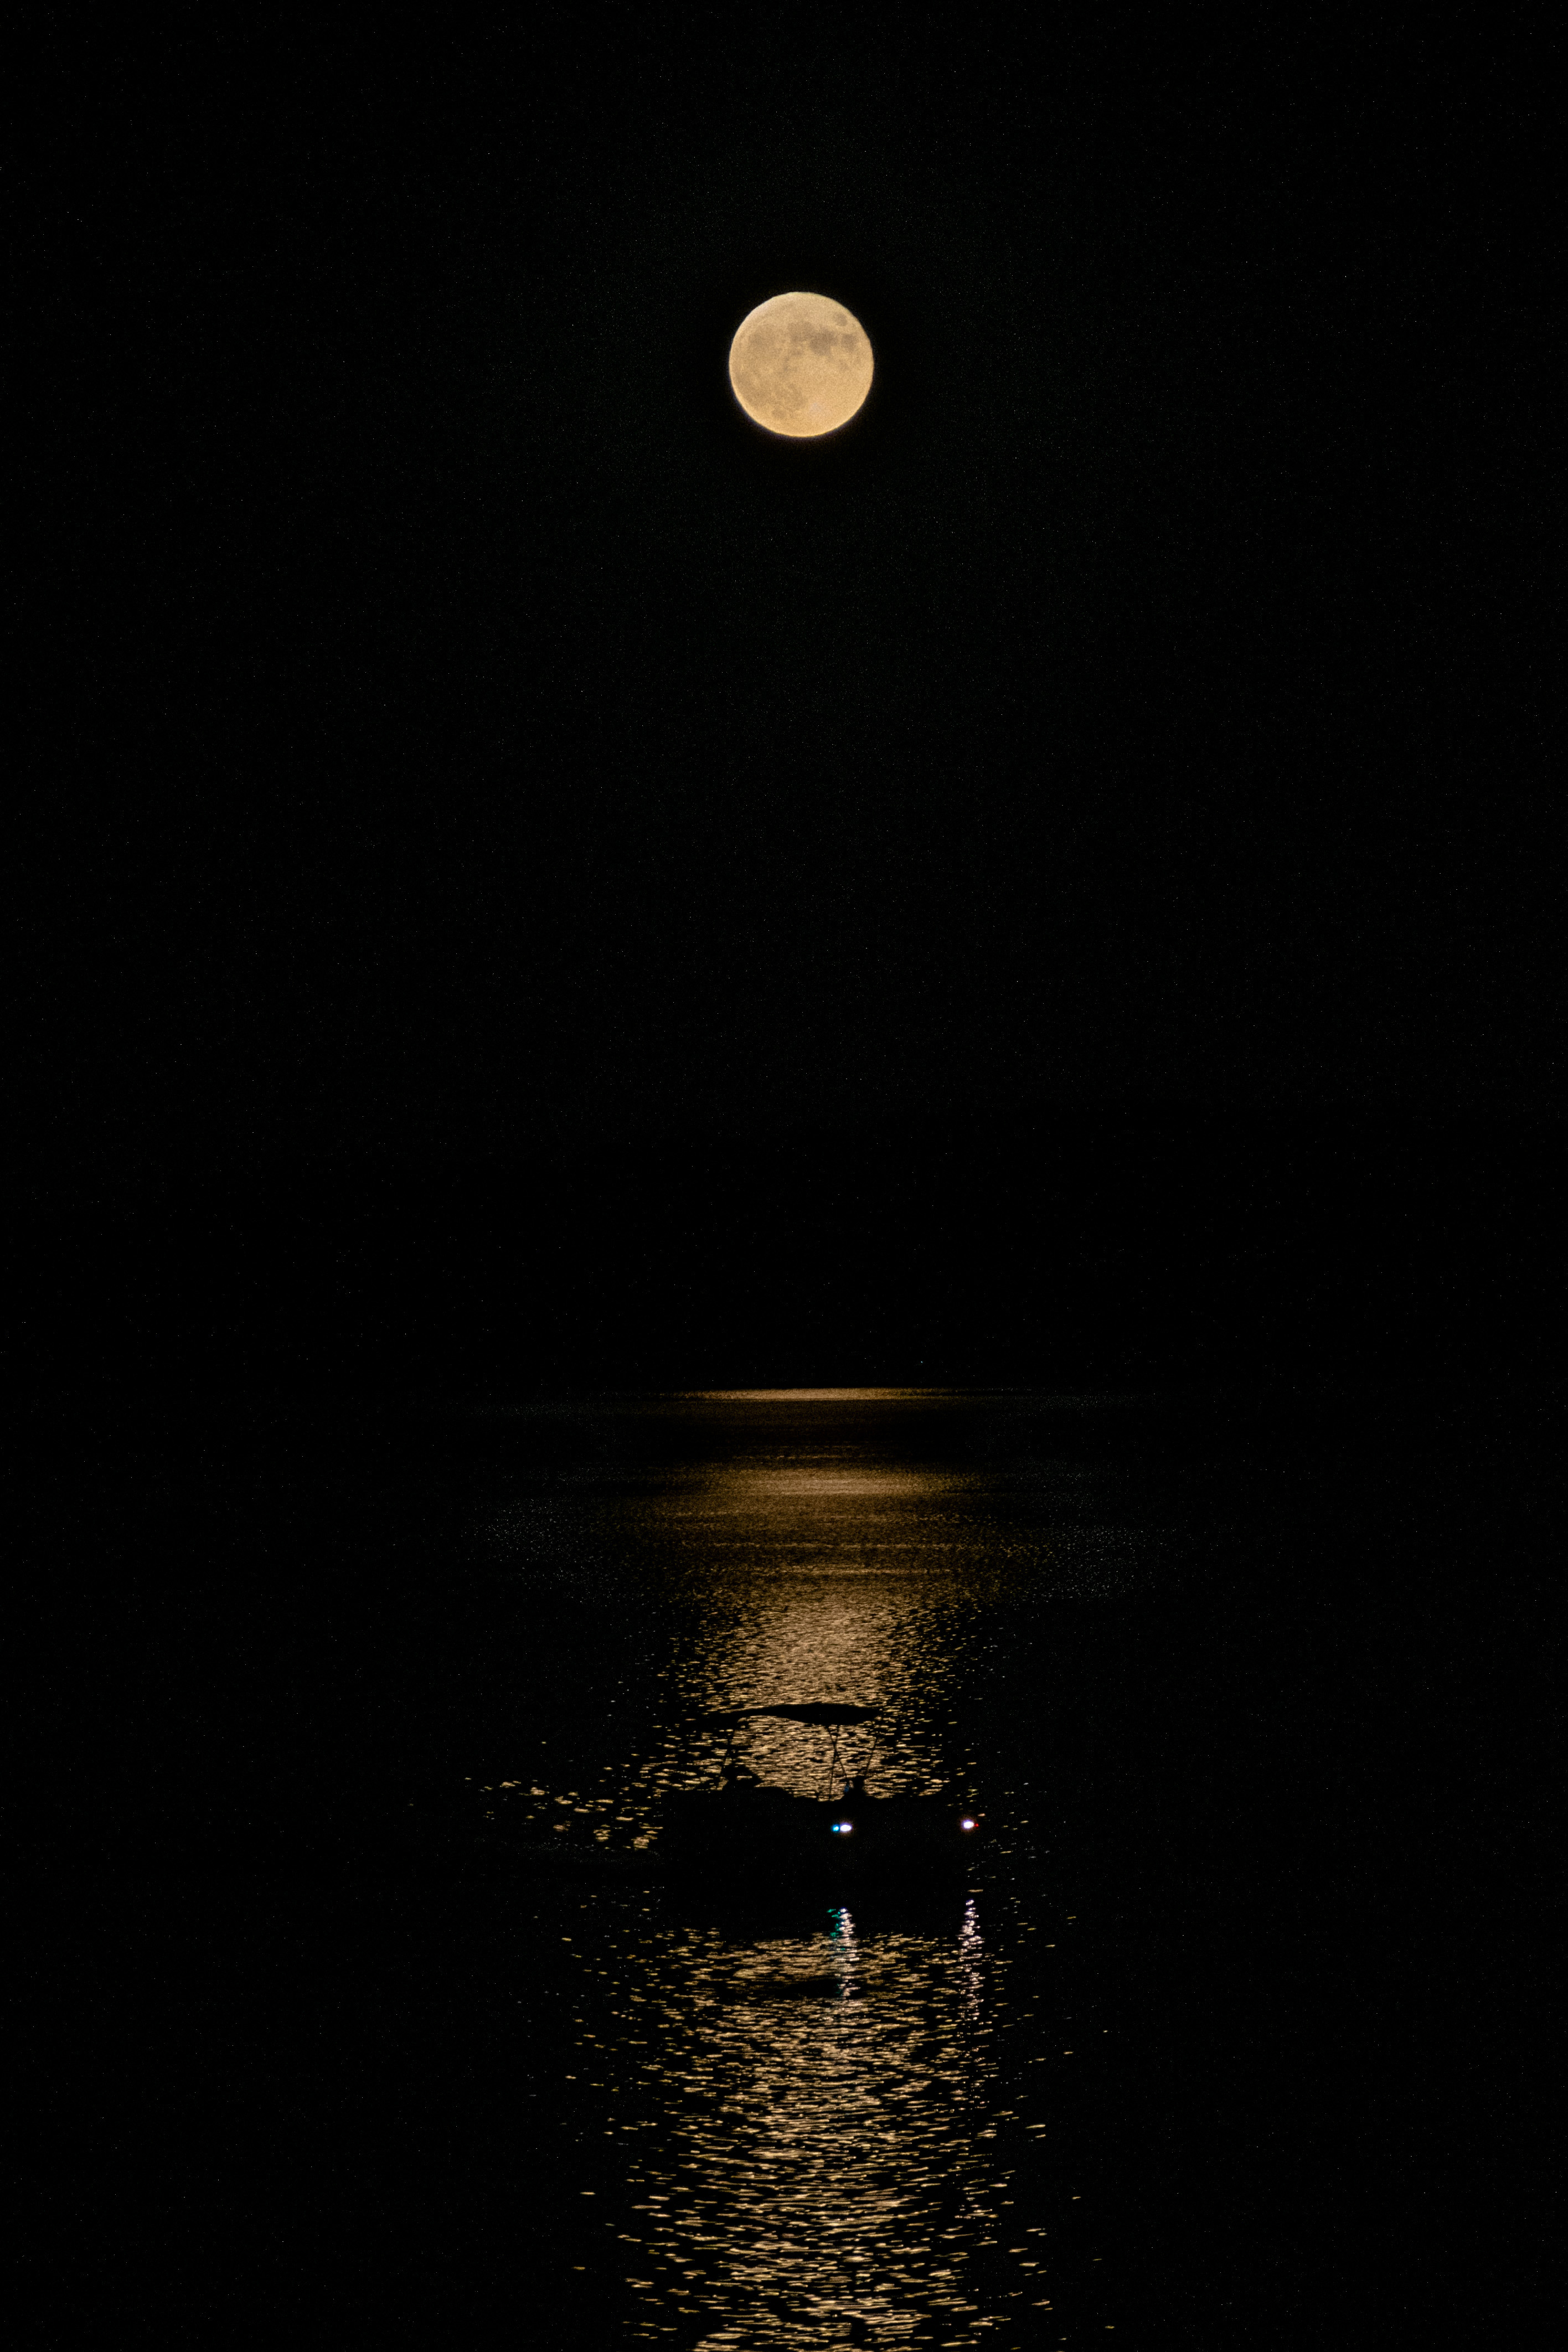 A full moon rises against the black sky, and a boat passes by its long, narrow reflection on the water.